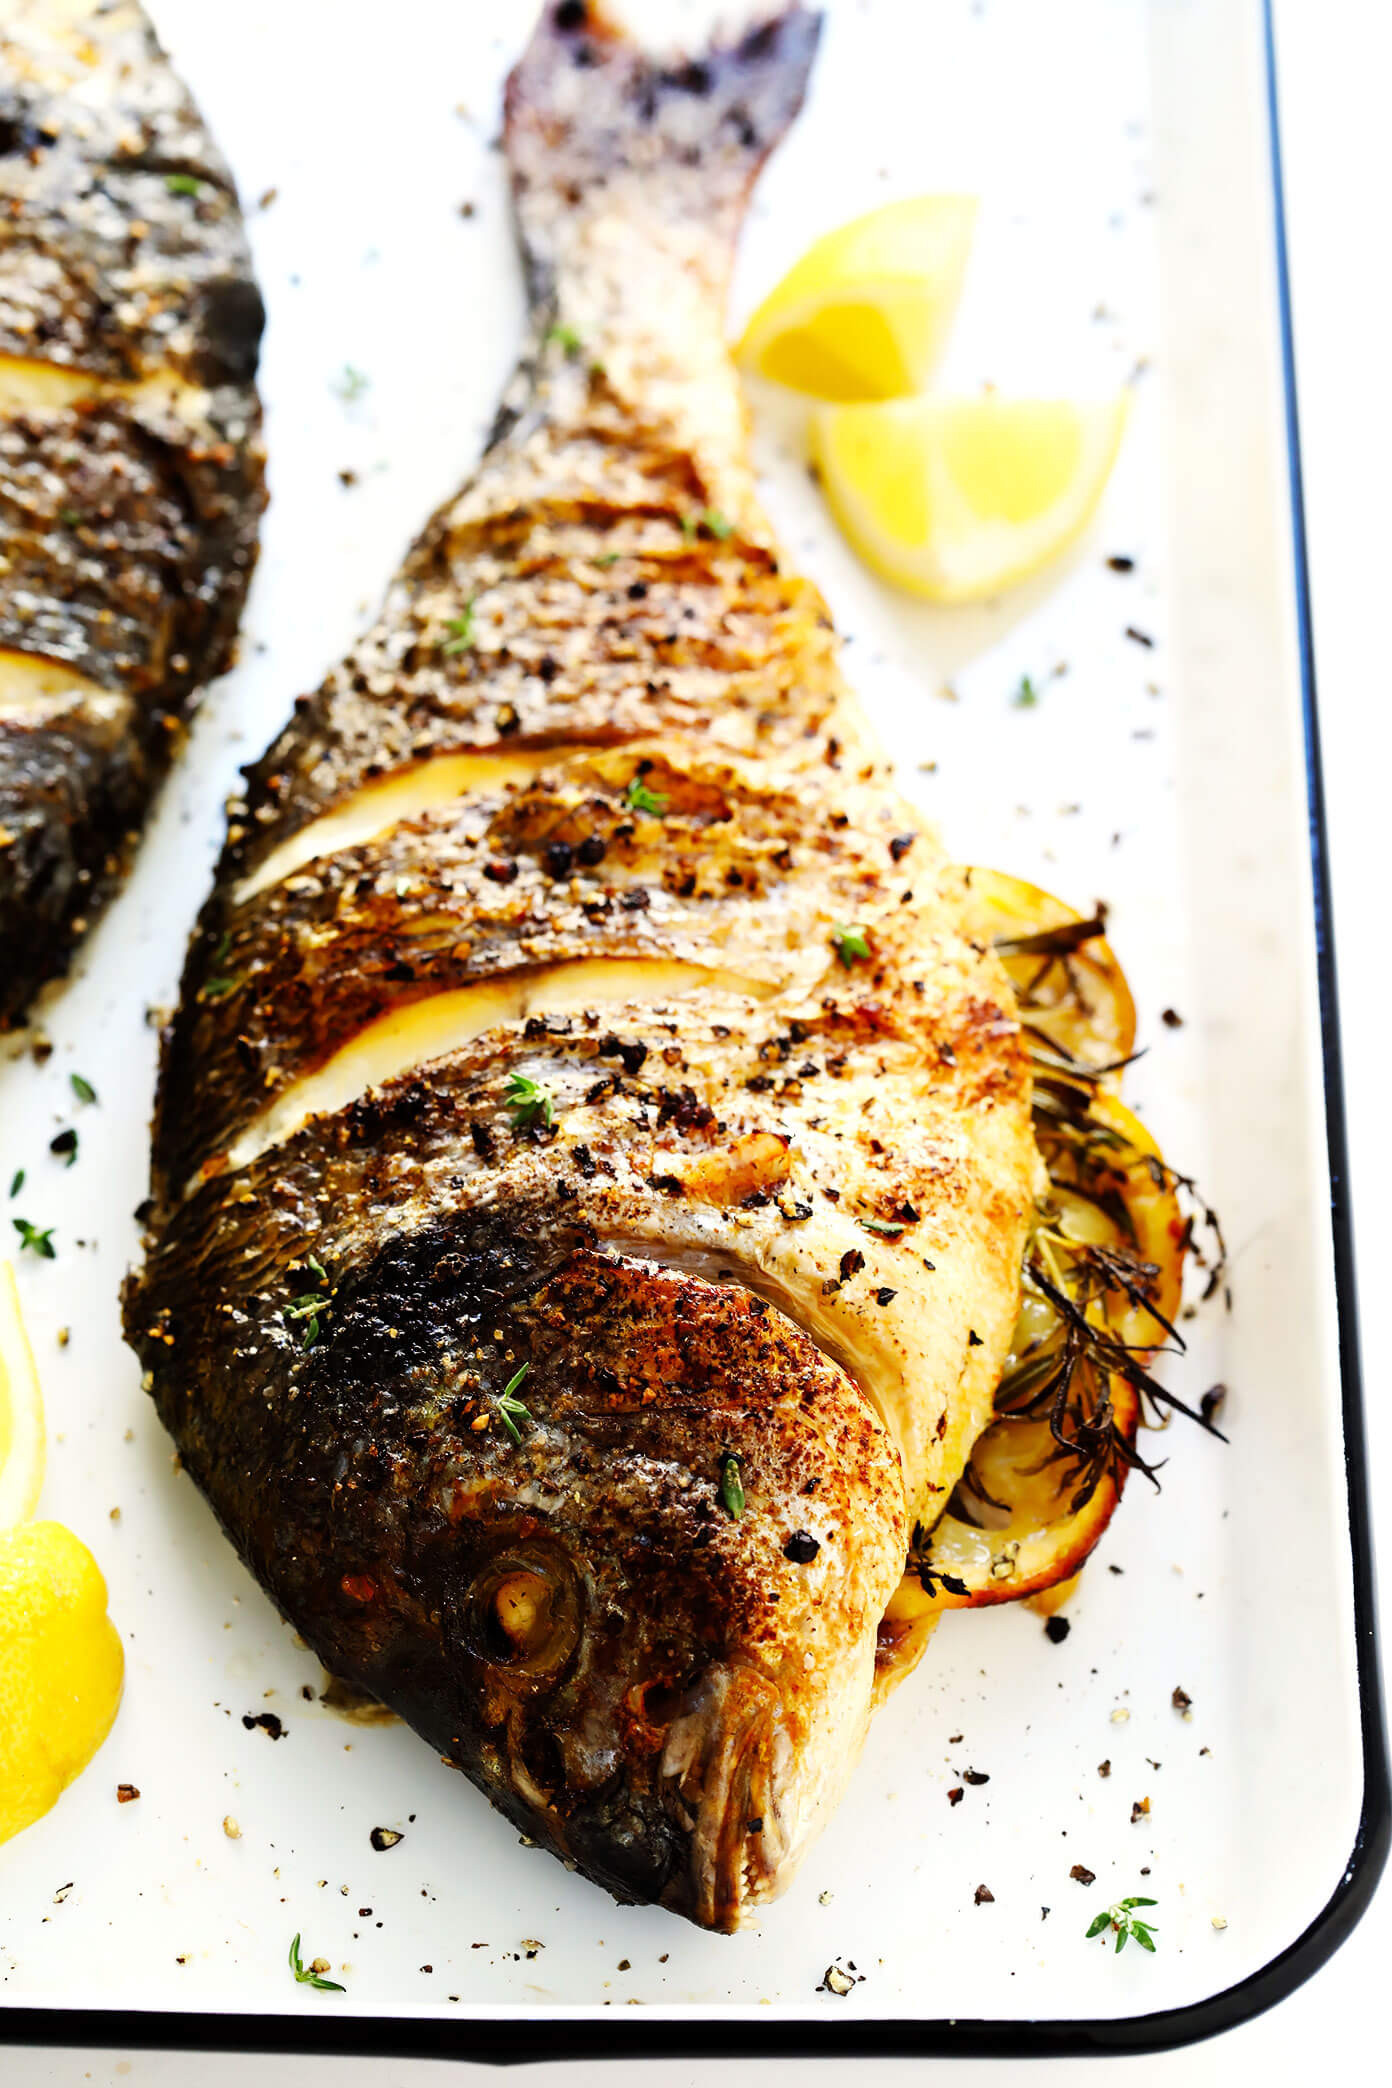 Recipes With Fish
 How To Cook A Whole Fish